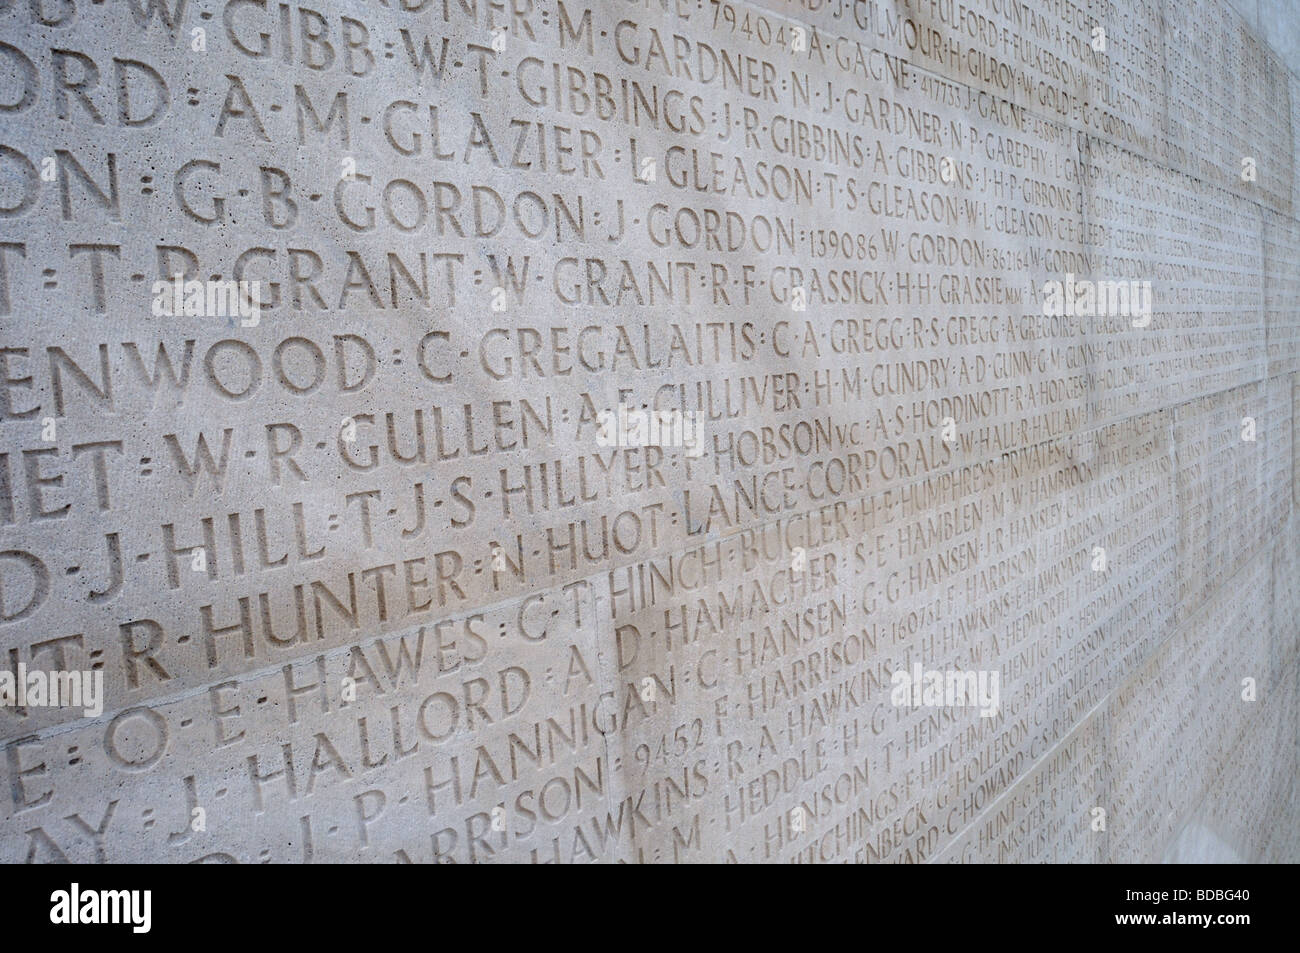 Names engraved on the Canadian Memorial at Vimy Ridge Stock Photo